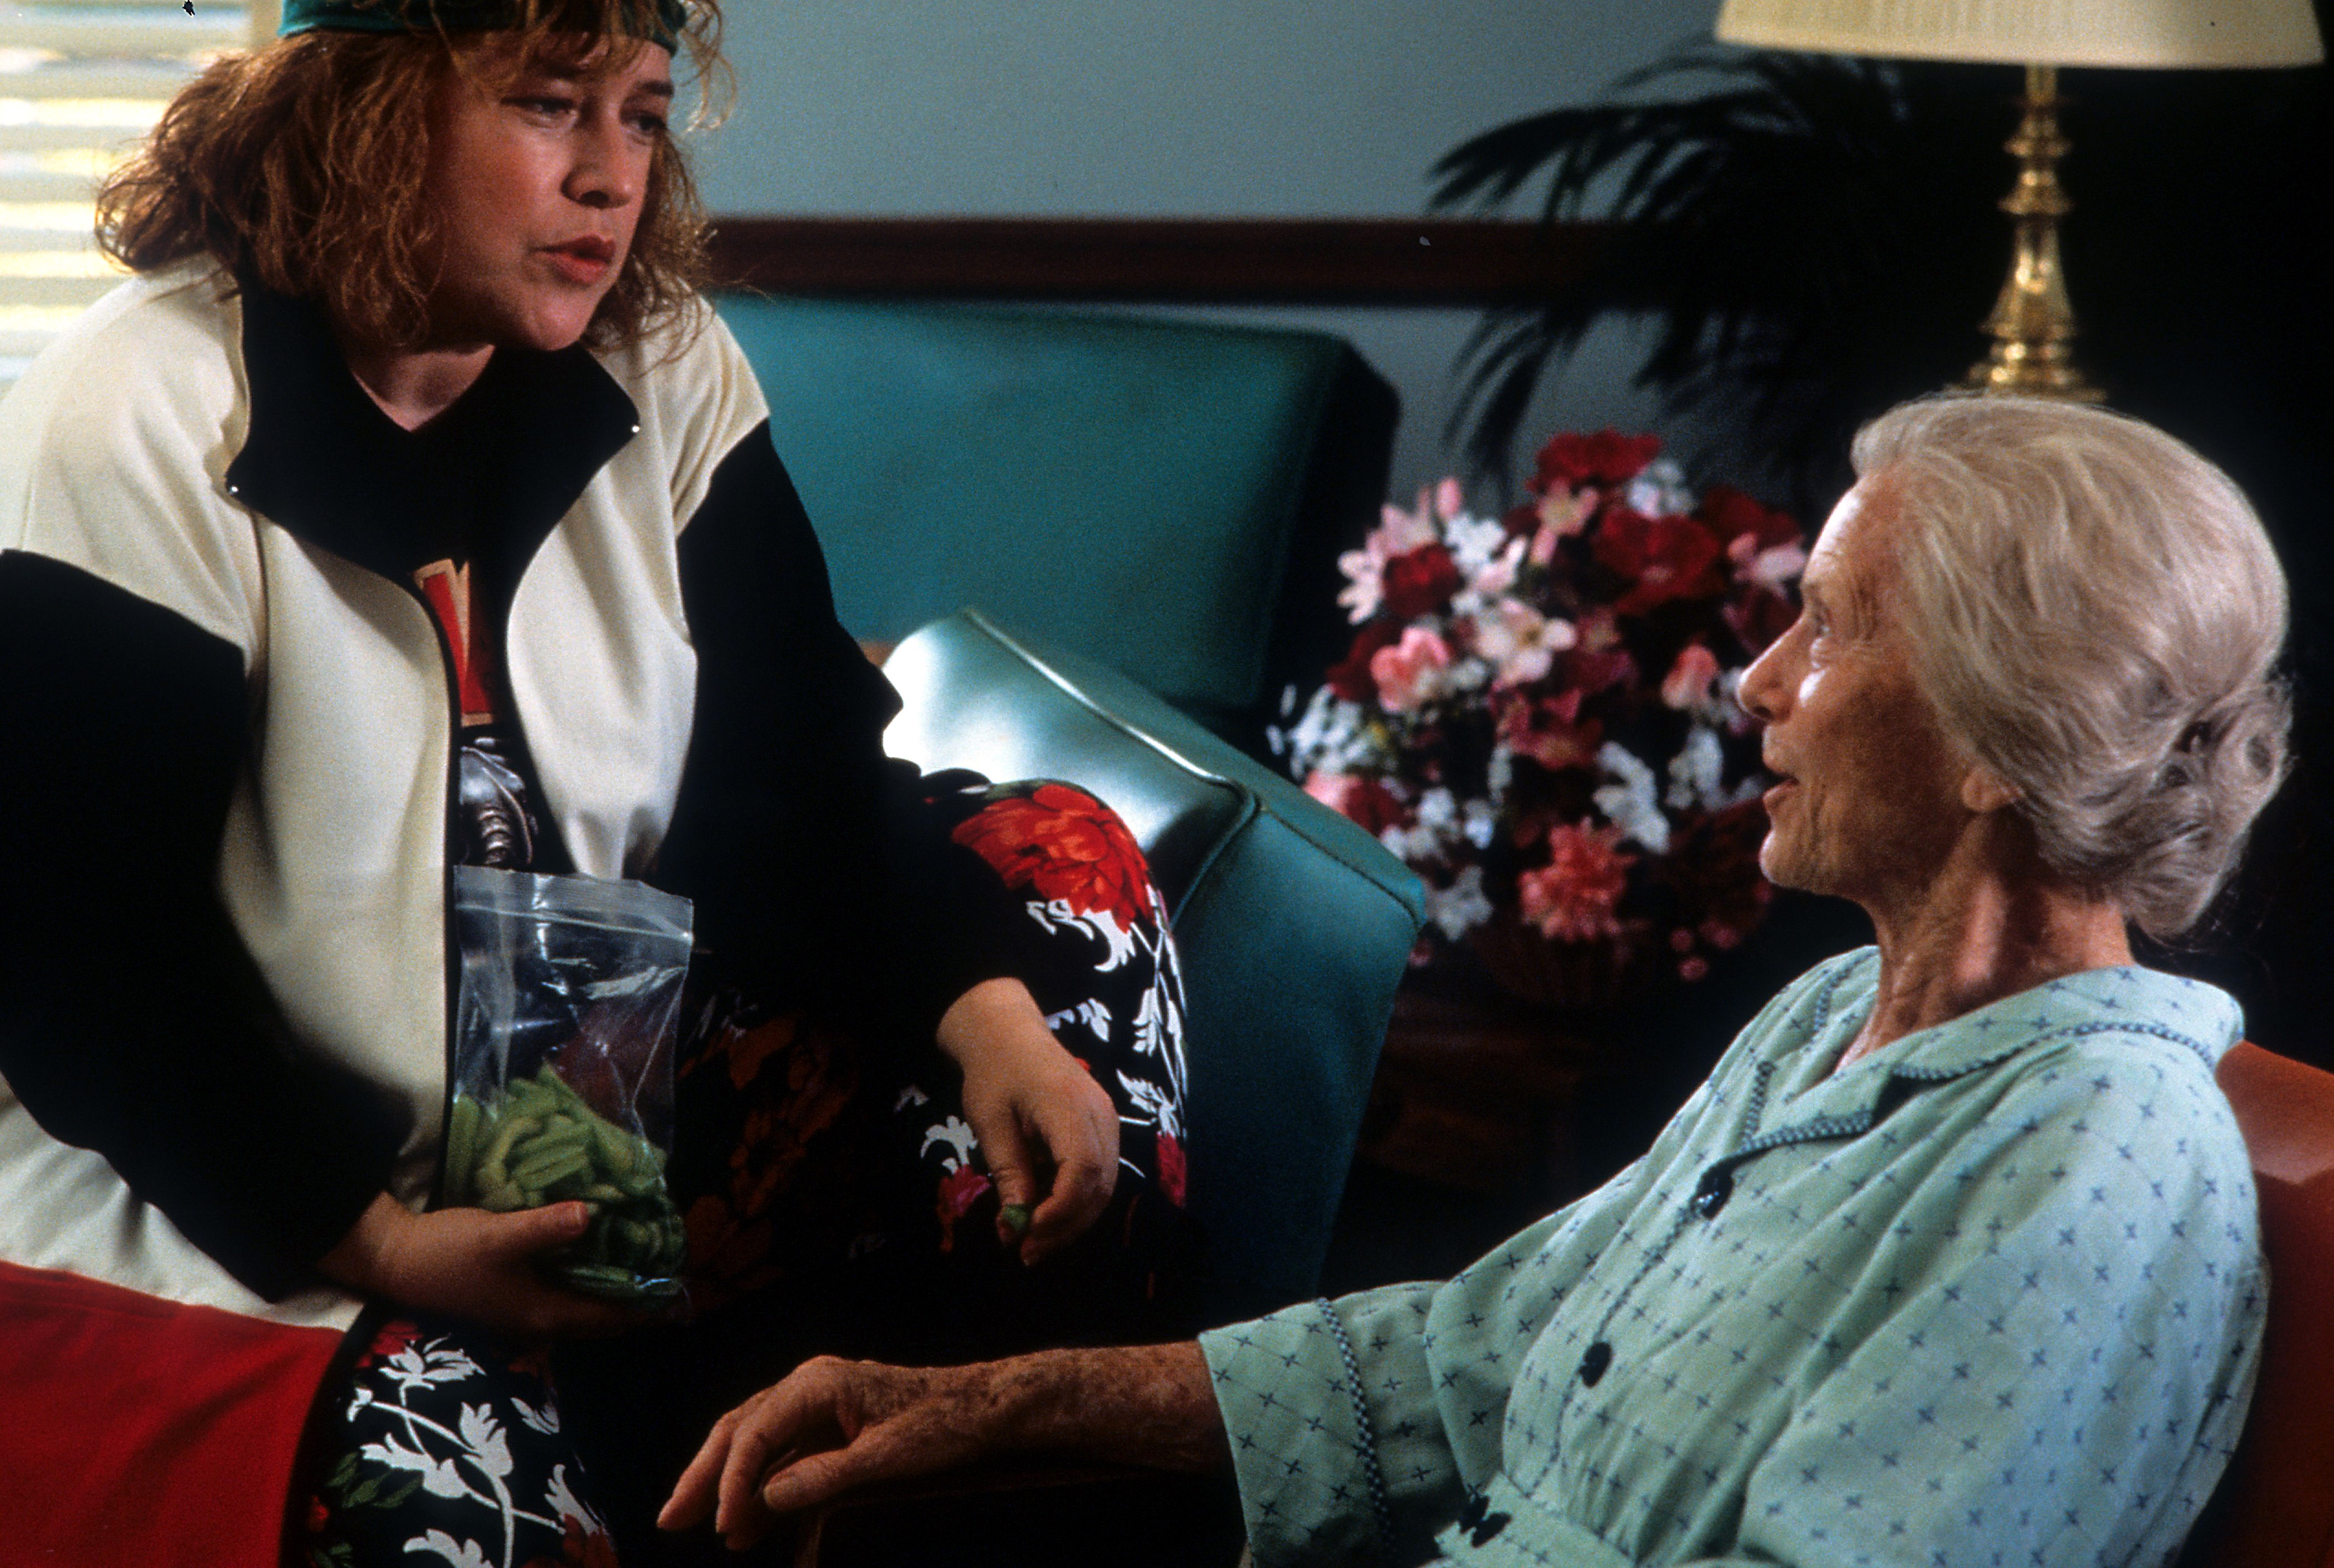 Kathy Bates sitting on a couch with Jessica Tandy in a scene from the film "Fried Green Tomatoes" in 1991 | Source: Getty Images